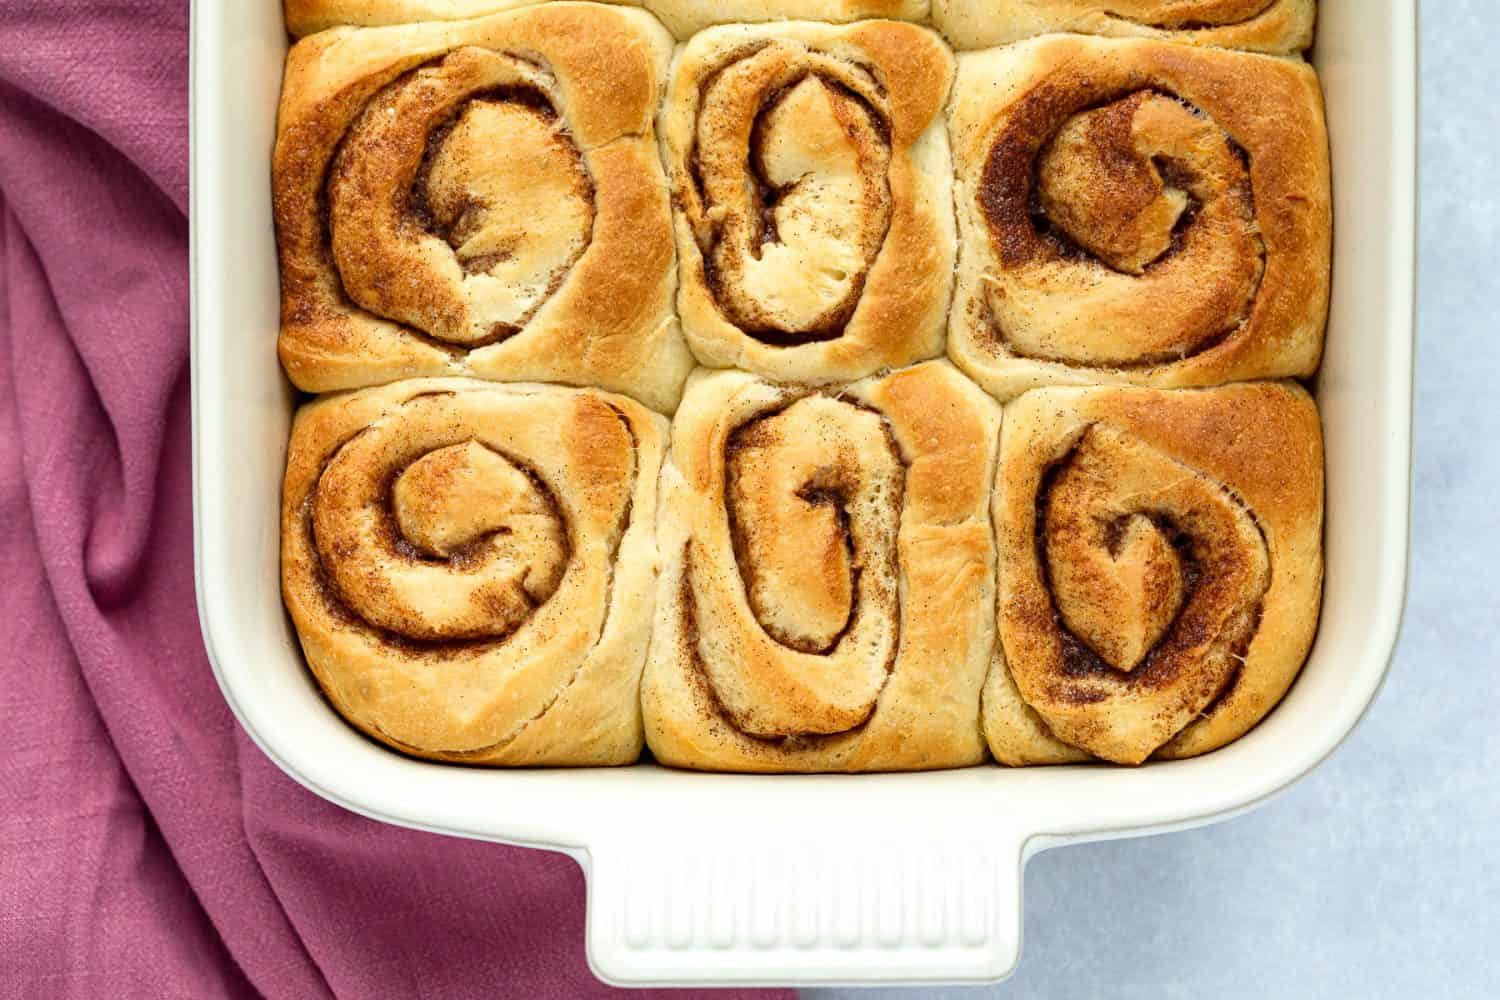 Close up image of 6 cinnamon rolls, the swirl in the rolls is visible. 